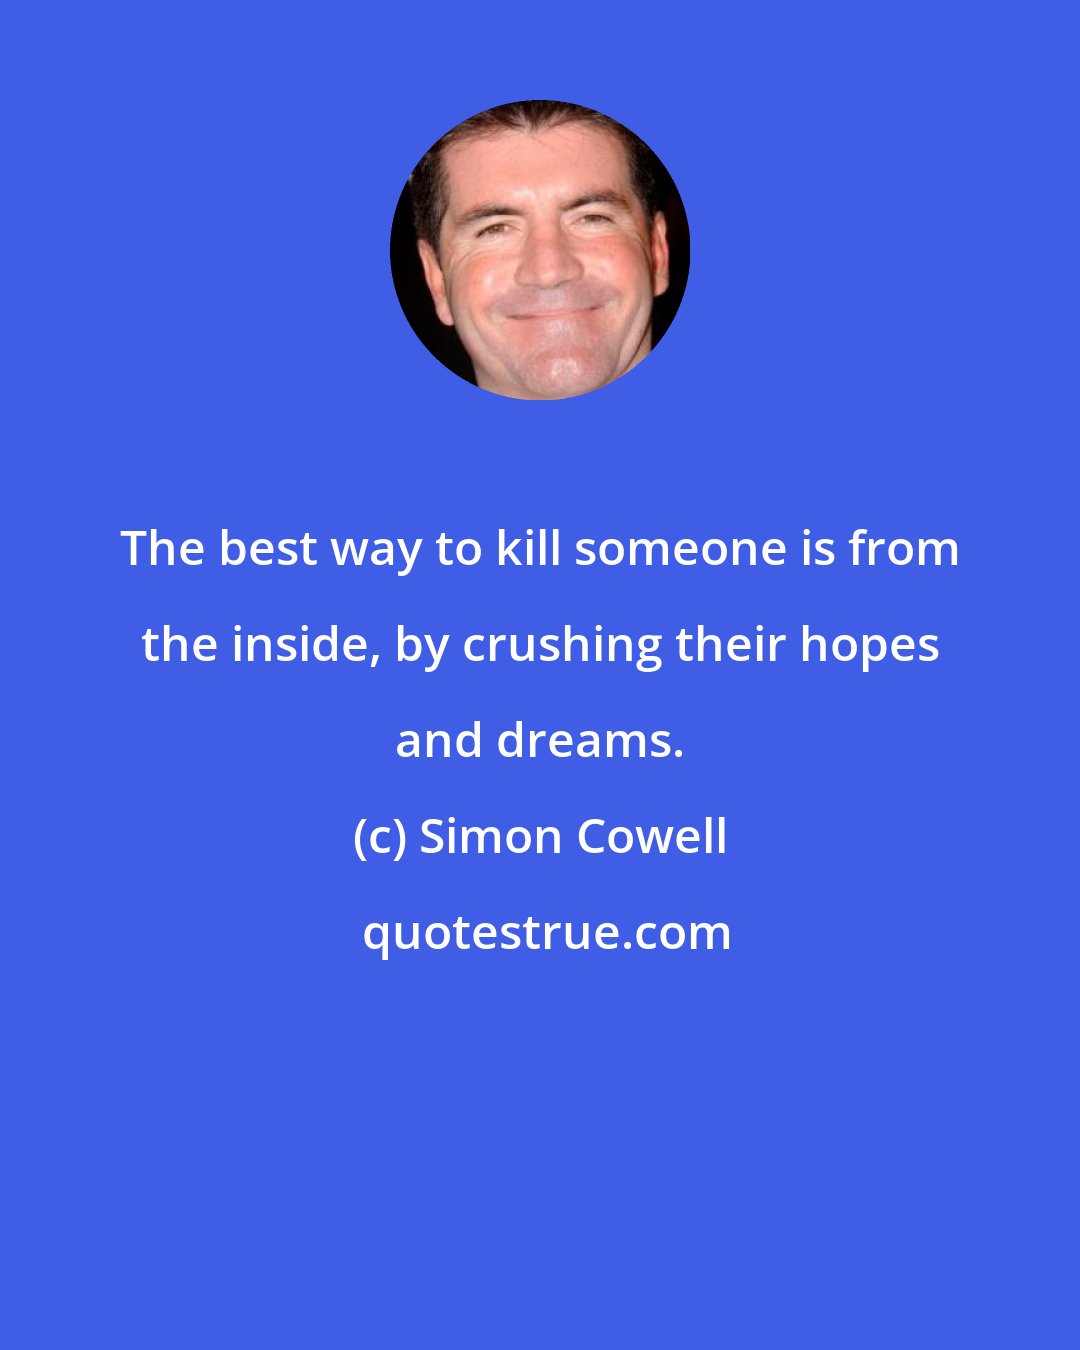 Simon Cowell: The best way to kill someone is from the inside, by crushing their hopes and dreams.